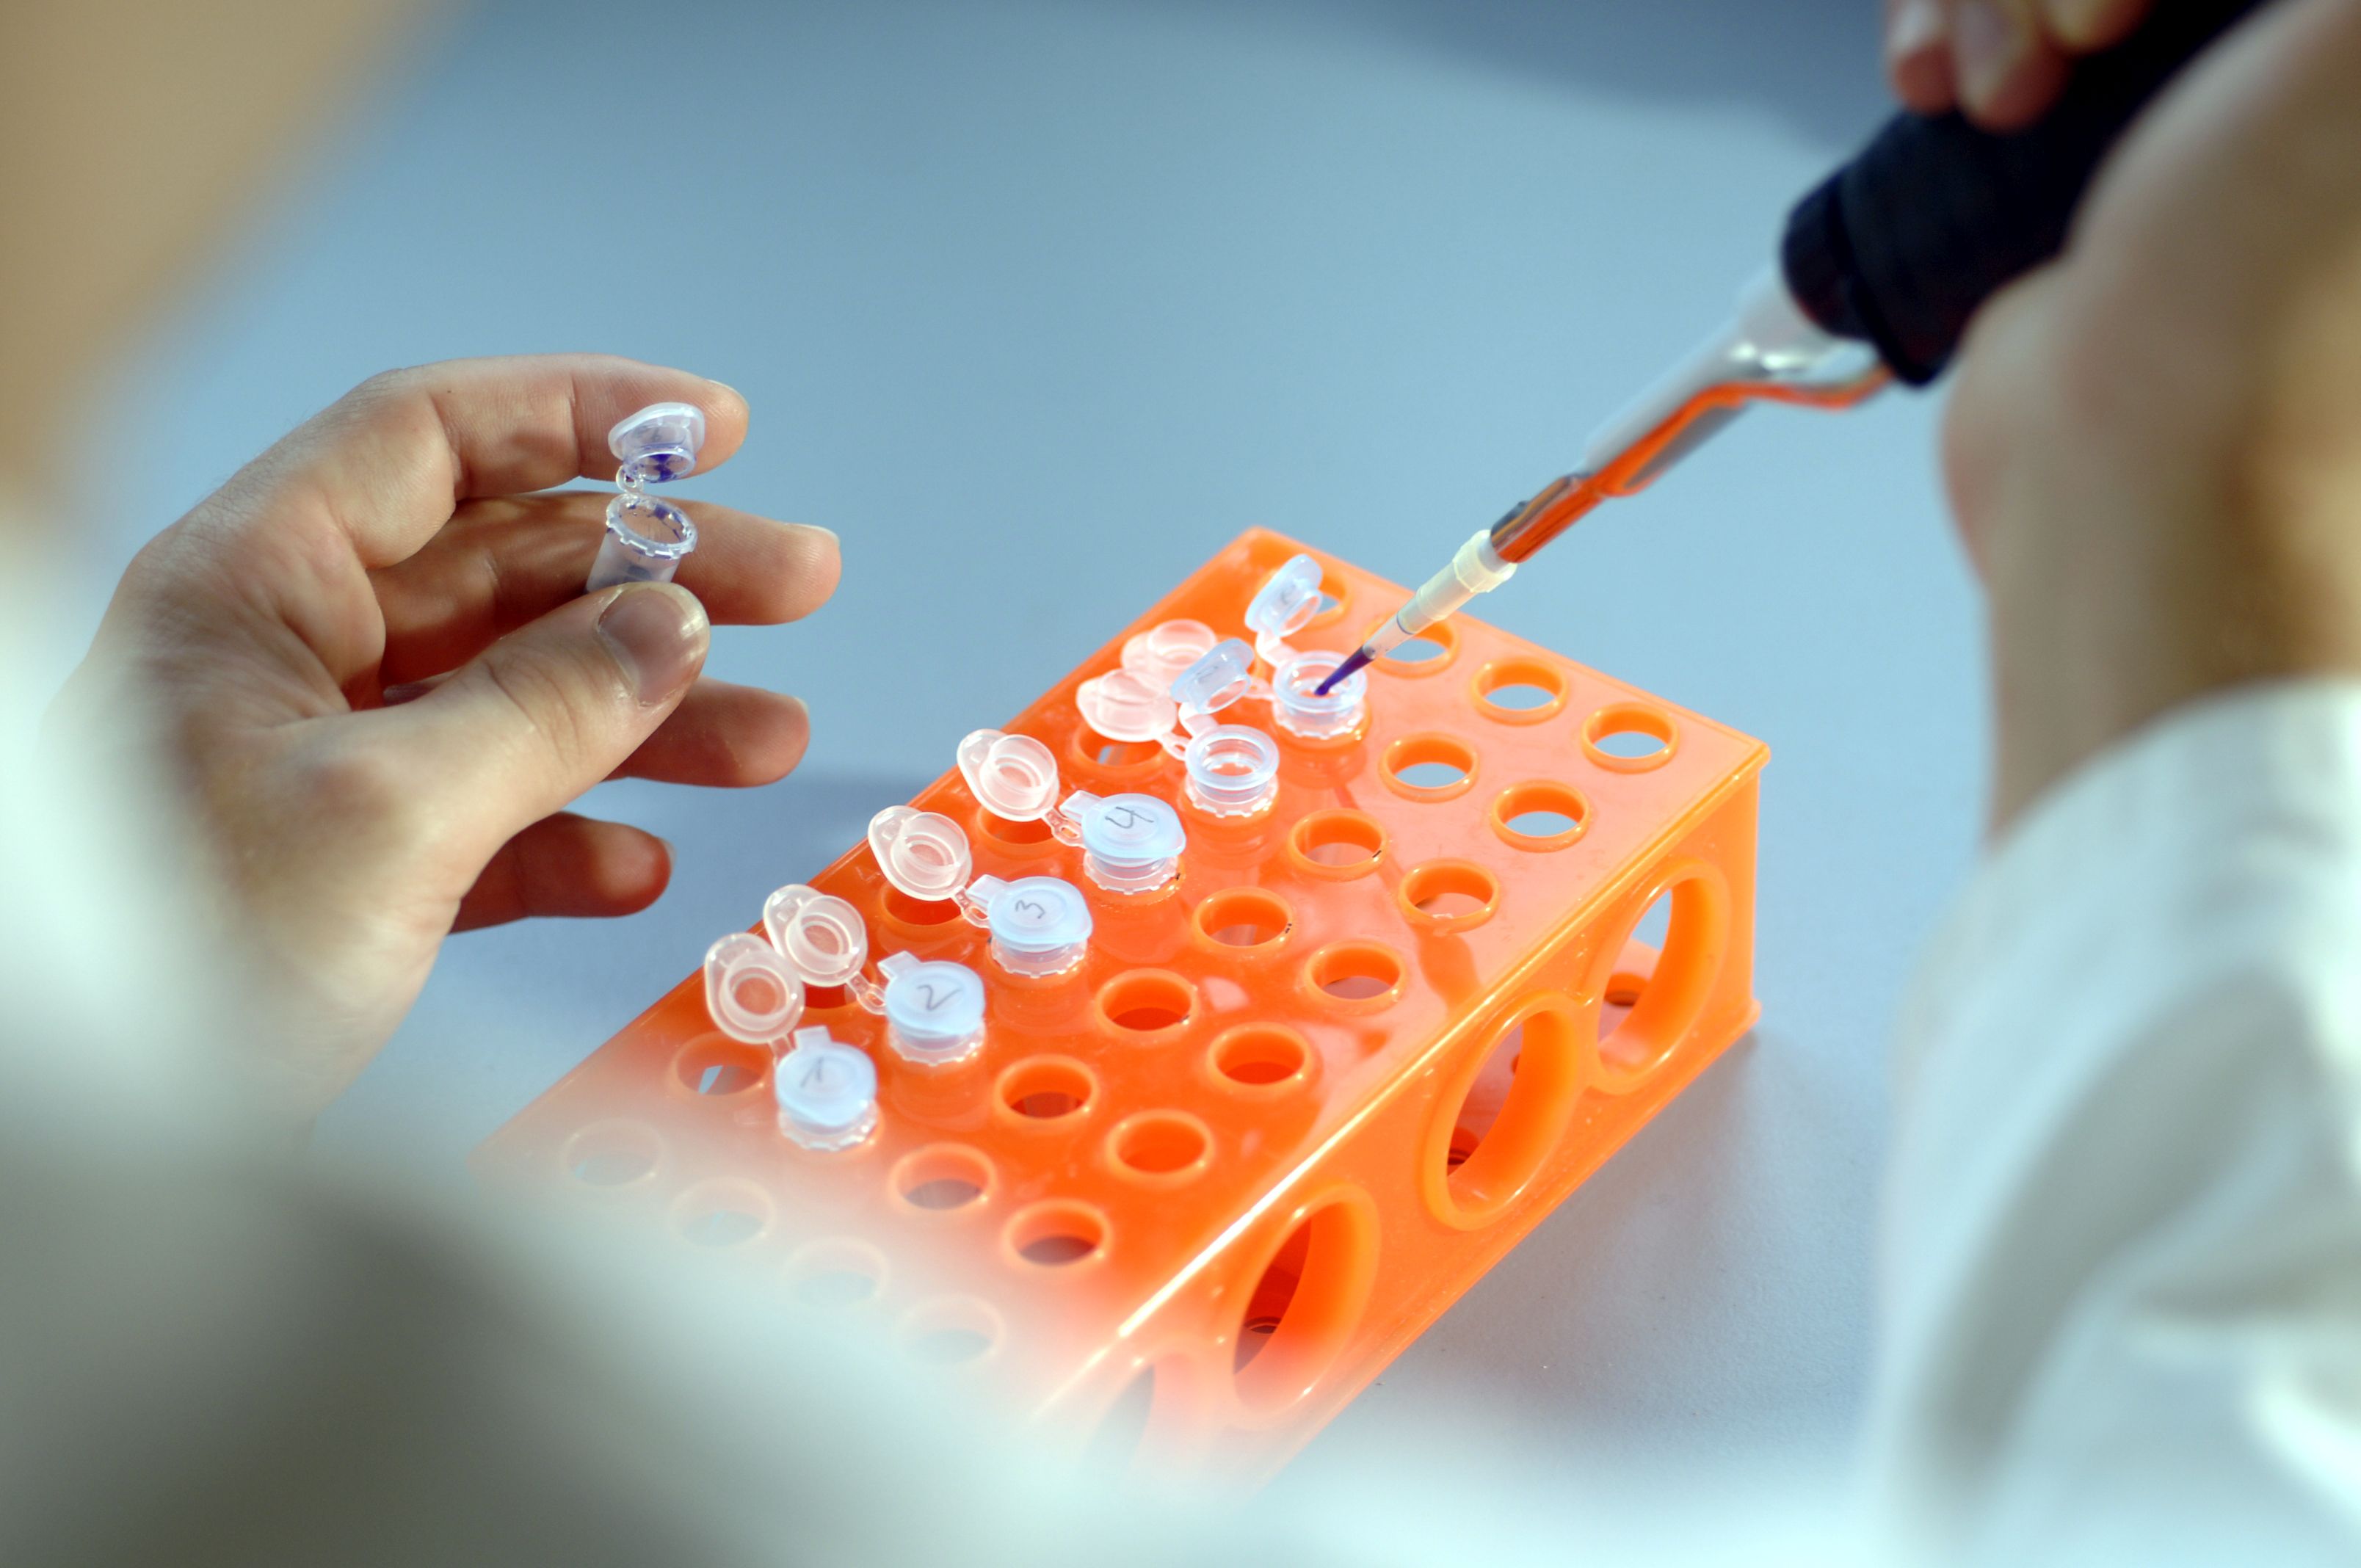 Preparation of a DNA sample in the laboratory